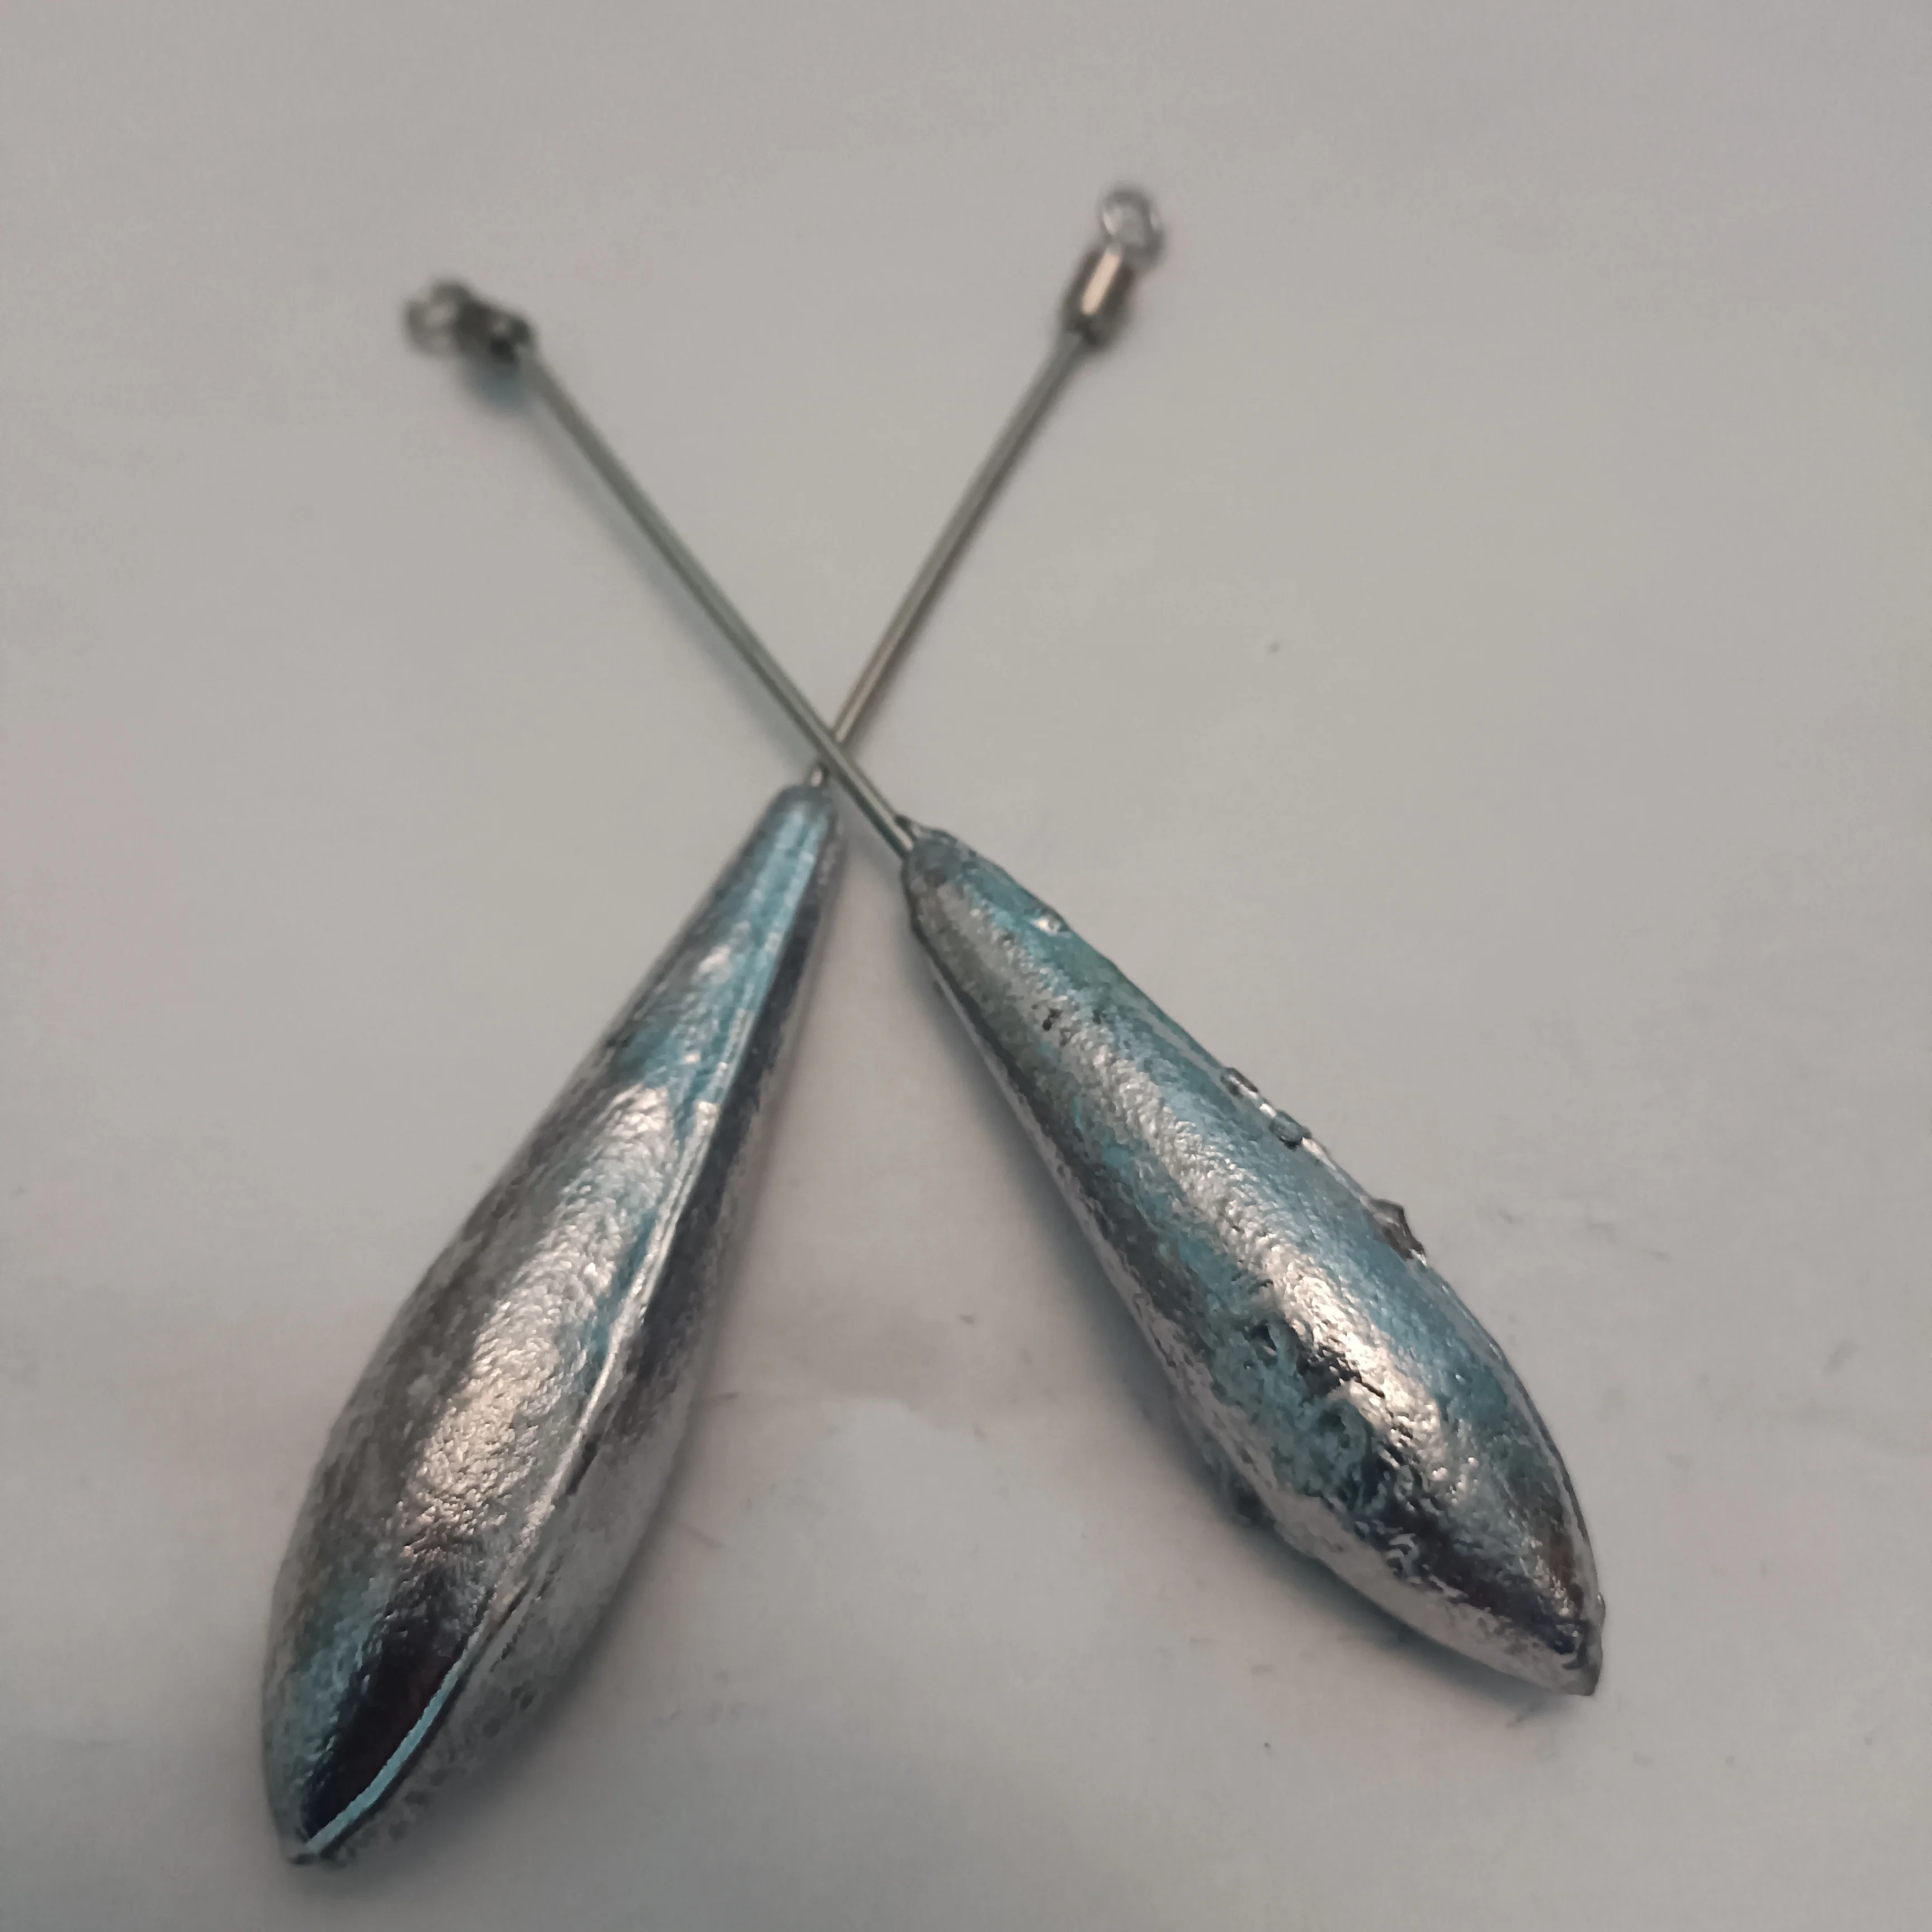 Lot 10 sinkers with Rod and rolling DCA elongated 60gr and 80gr